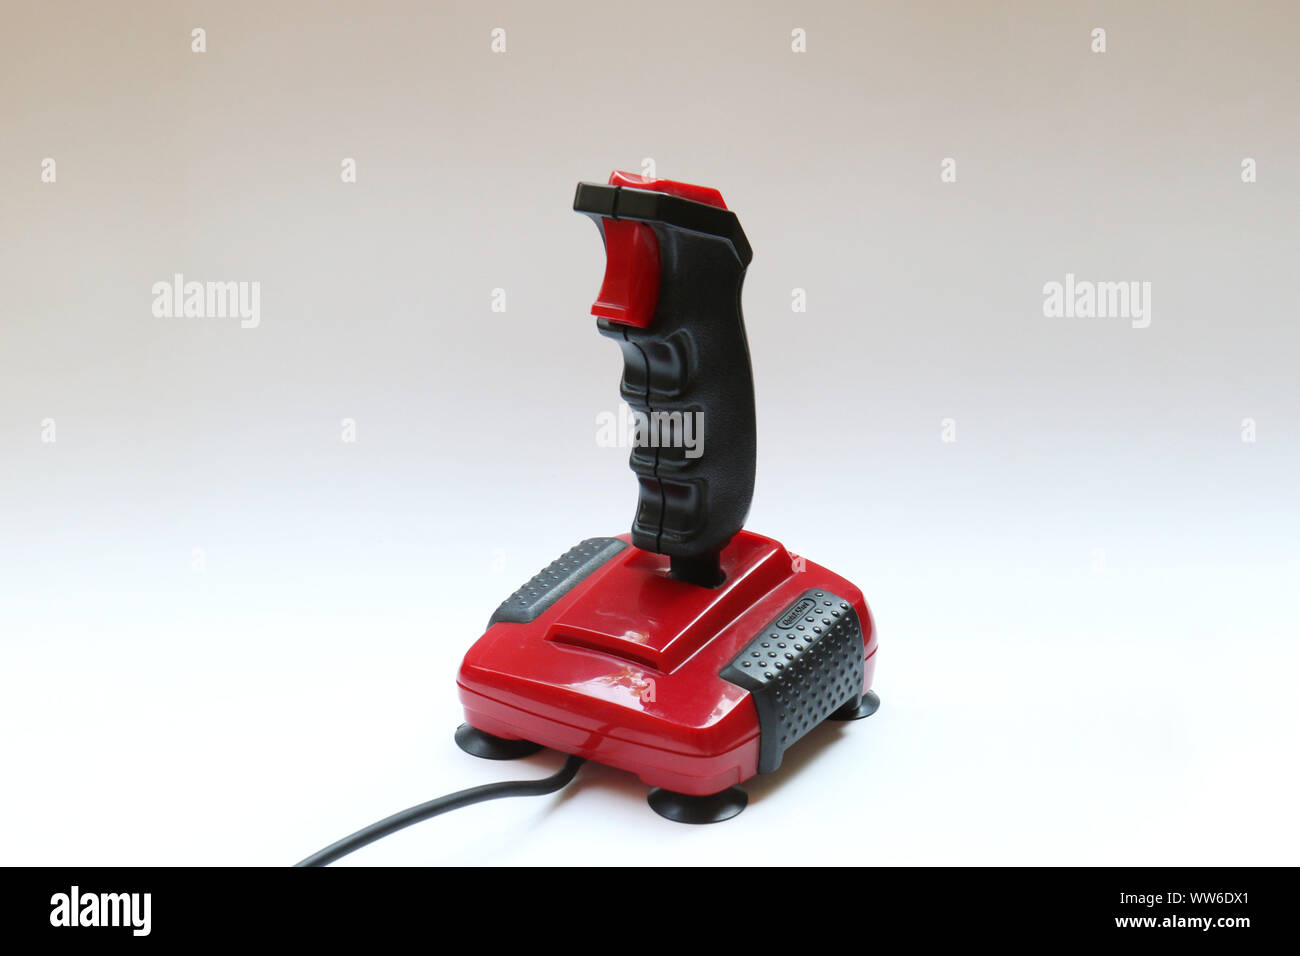 BERLIN - AUGUST 27, 2019: Classic Retro Joystick Quick Shot II from the Eighties on white. It was very popular with Commodore Amiga and C64 Gaming Com Stock Photo